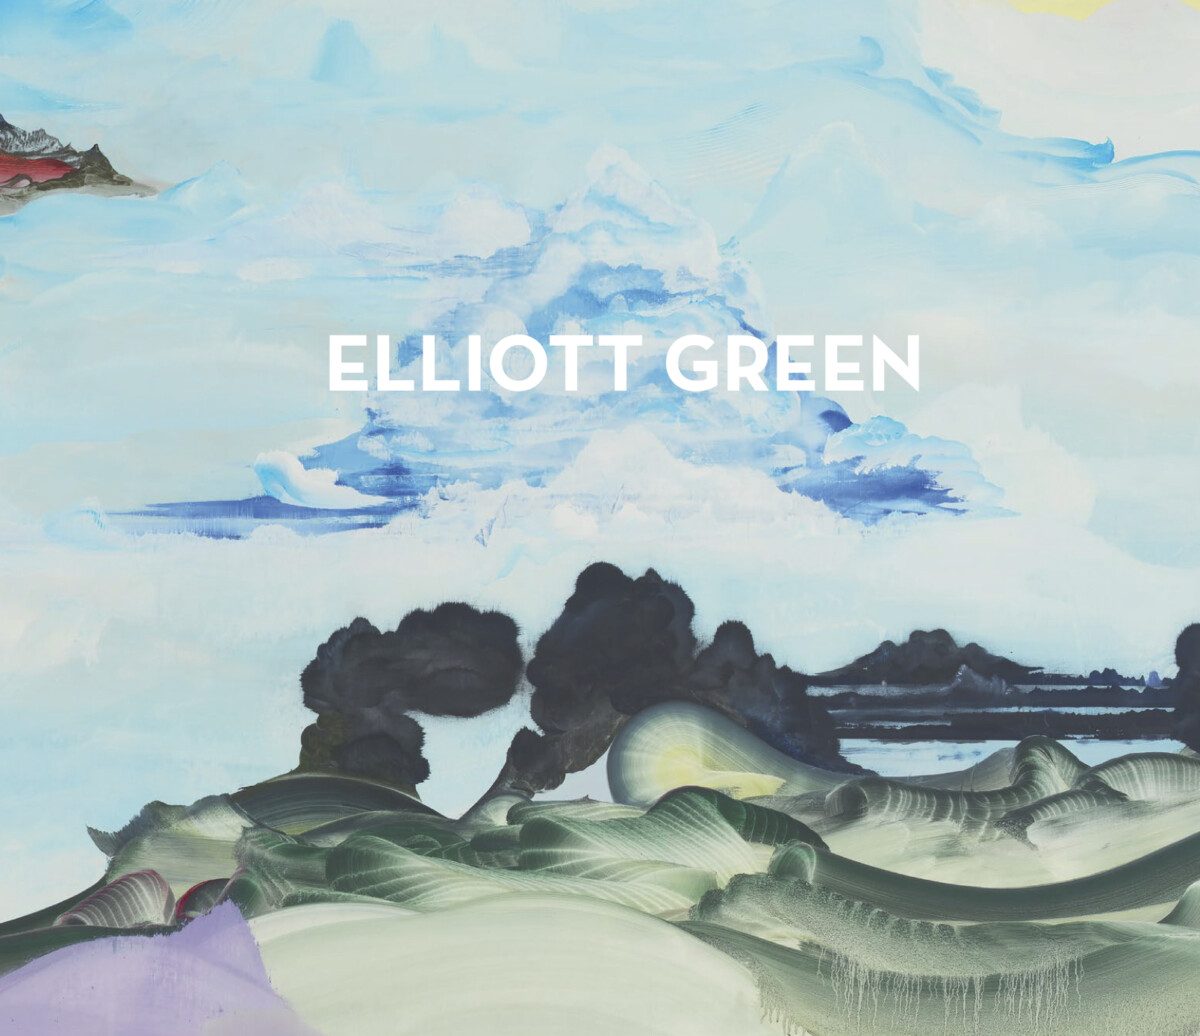 This is the cover of the Elliott Green catalog for a one-person exhibition of paintings at the Miles McEnery Gallery in New York City